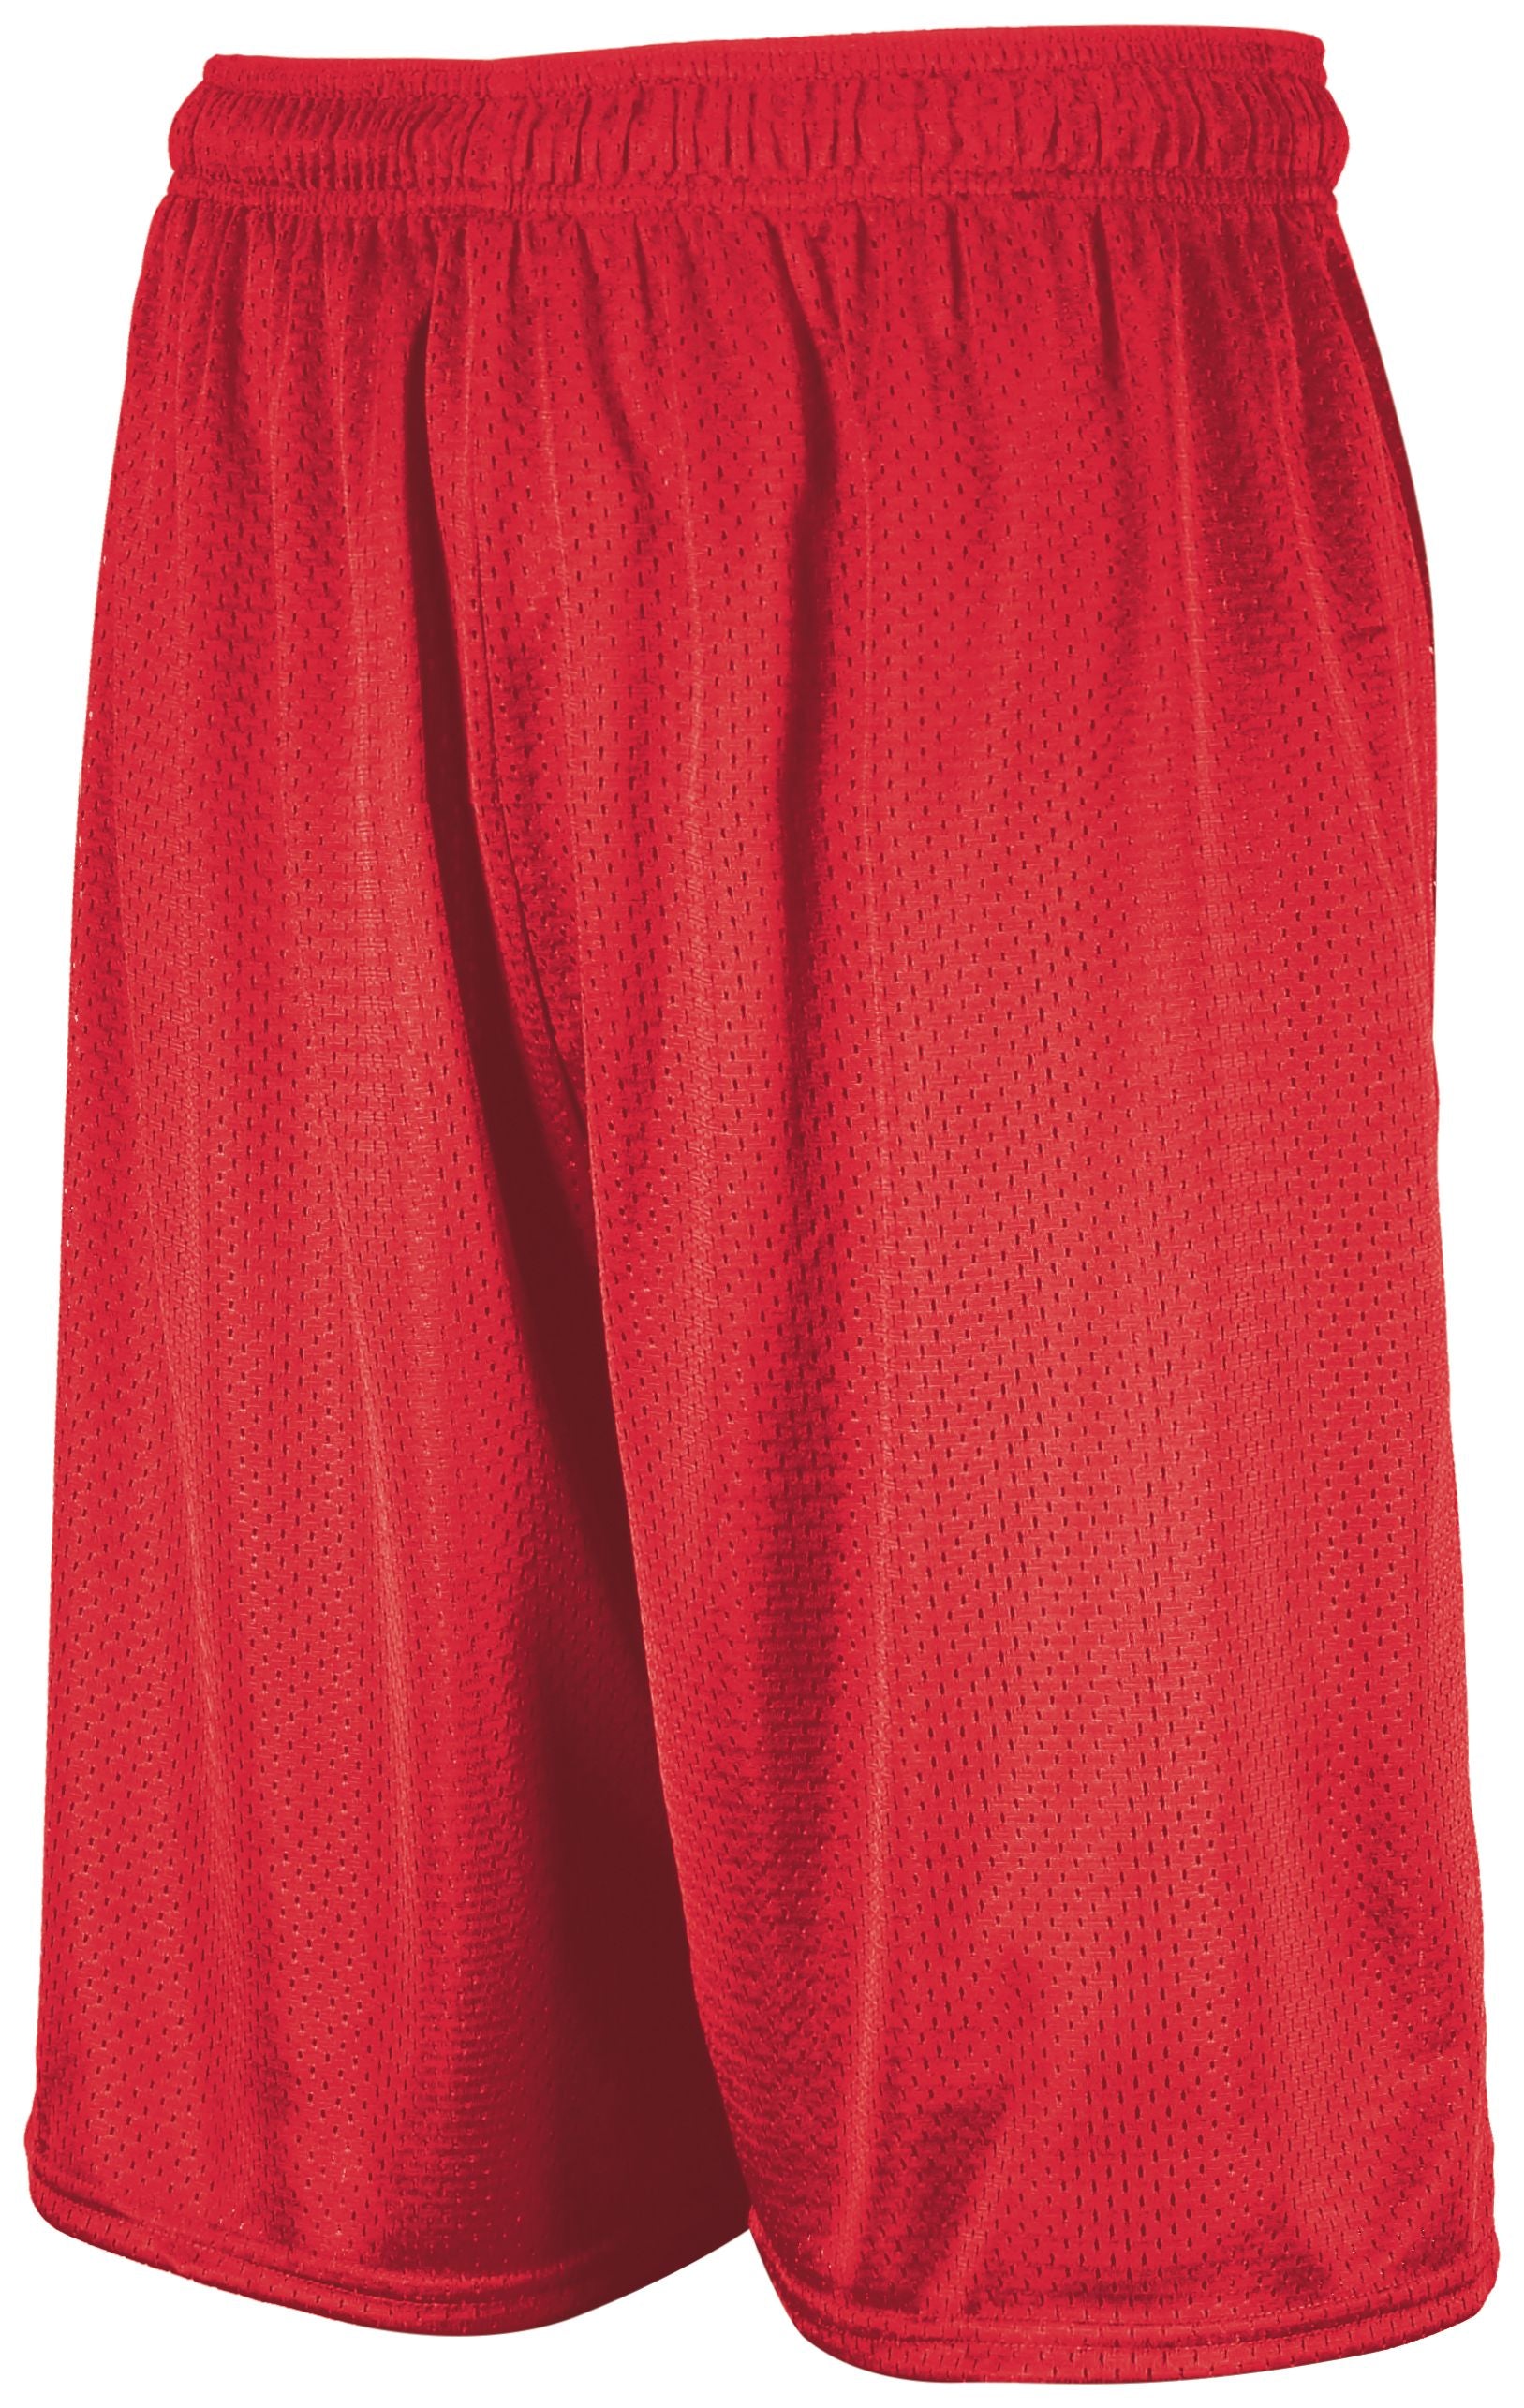 Russell Athletic Youth Dri-Power Mesh Shorts in True Red  -Part of the Youth, Youth-Shorts, Russell-Athletic-Products product lines at KanaleyCreations.com